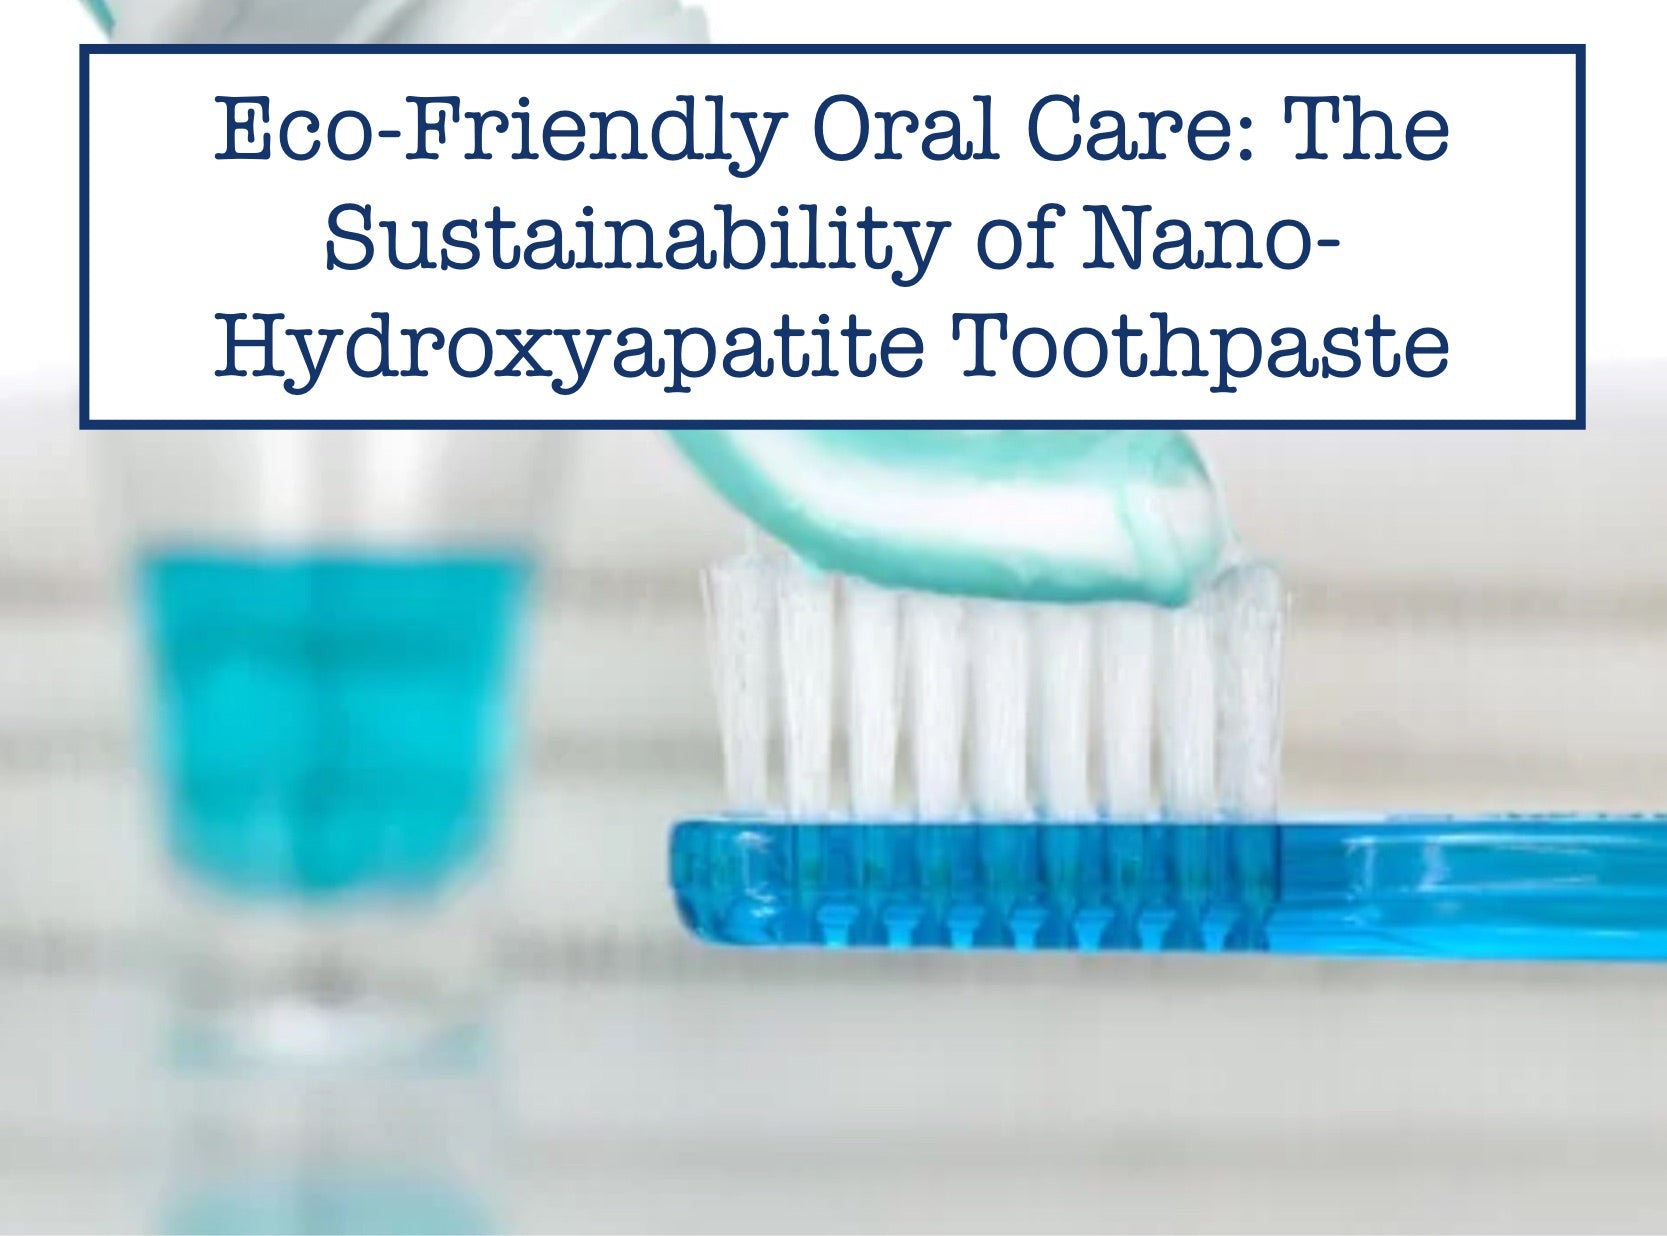 Eco-Friendly Oral Care: The Sustainability of Nano-Hydroxyapatite Toothpaste